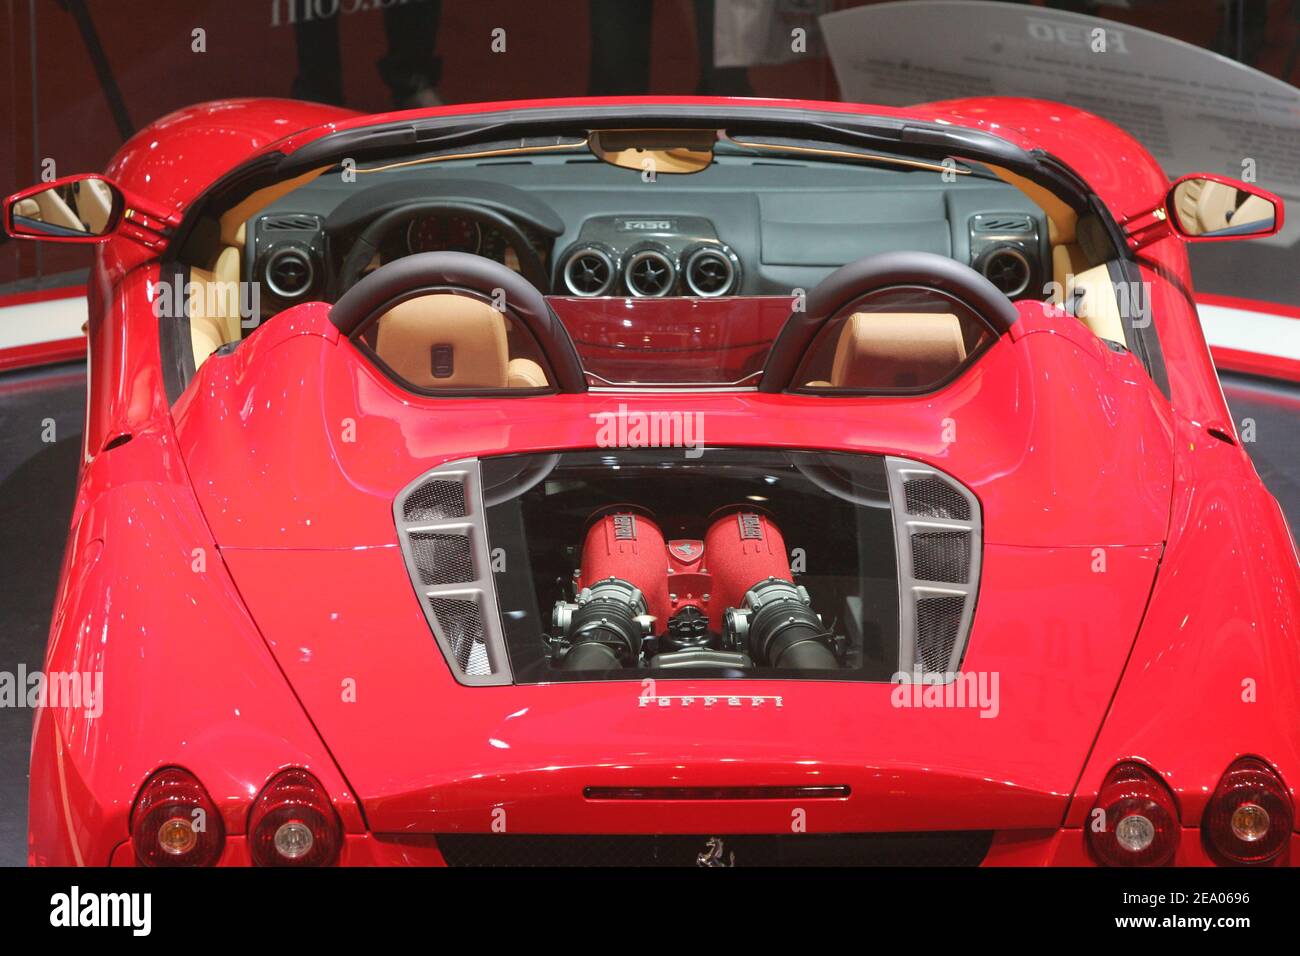 The new Ferrari F430 Spyder is on display during its first world presentation at the 75th Geneva motor show in Geneva, Switzerland, on March 2, 2005. Maranello's new convertible is the same 4.3-litre V8 found in the F430 hardtop. Producing 490 hp at a soaring 8500 rpm, the 90-degree unit should propel the F430 Spyder from 0-60 mph in the low four-second range. Photo by Laurent Zabulon/ABACA. Stock Photo